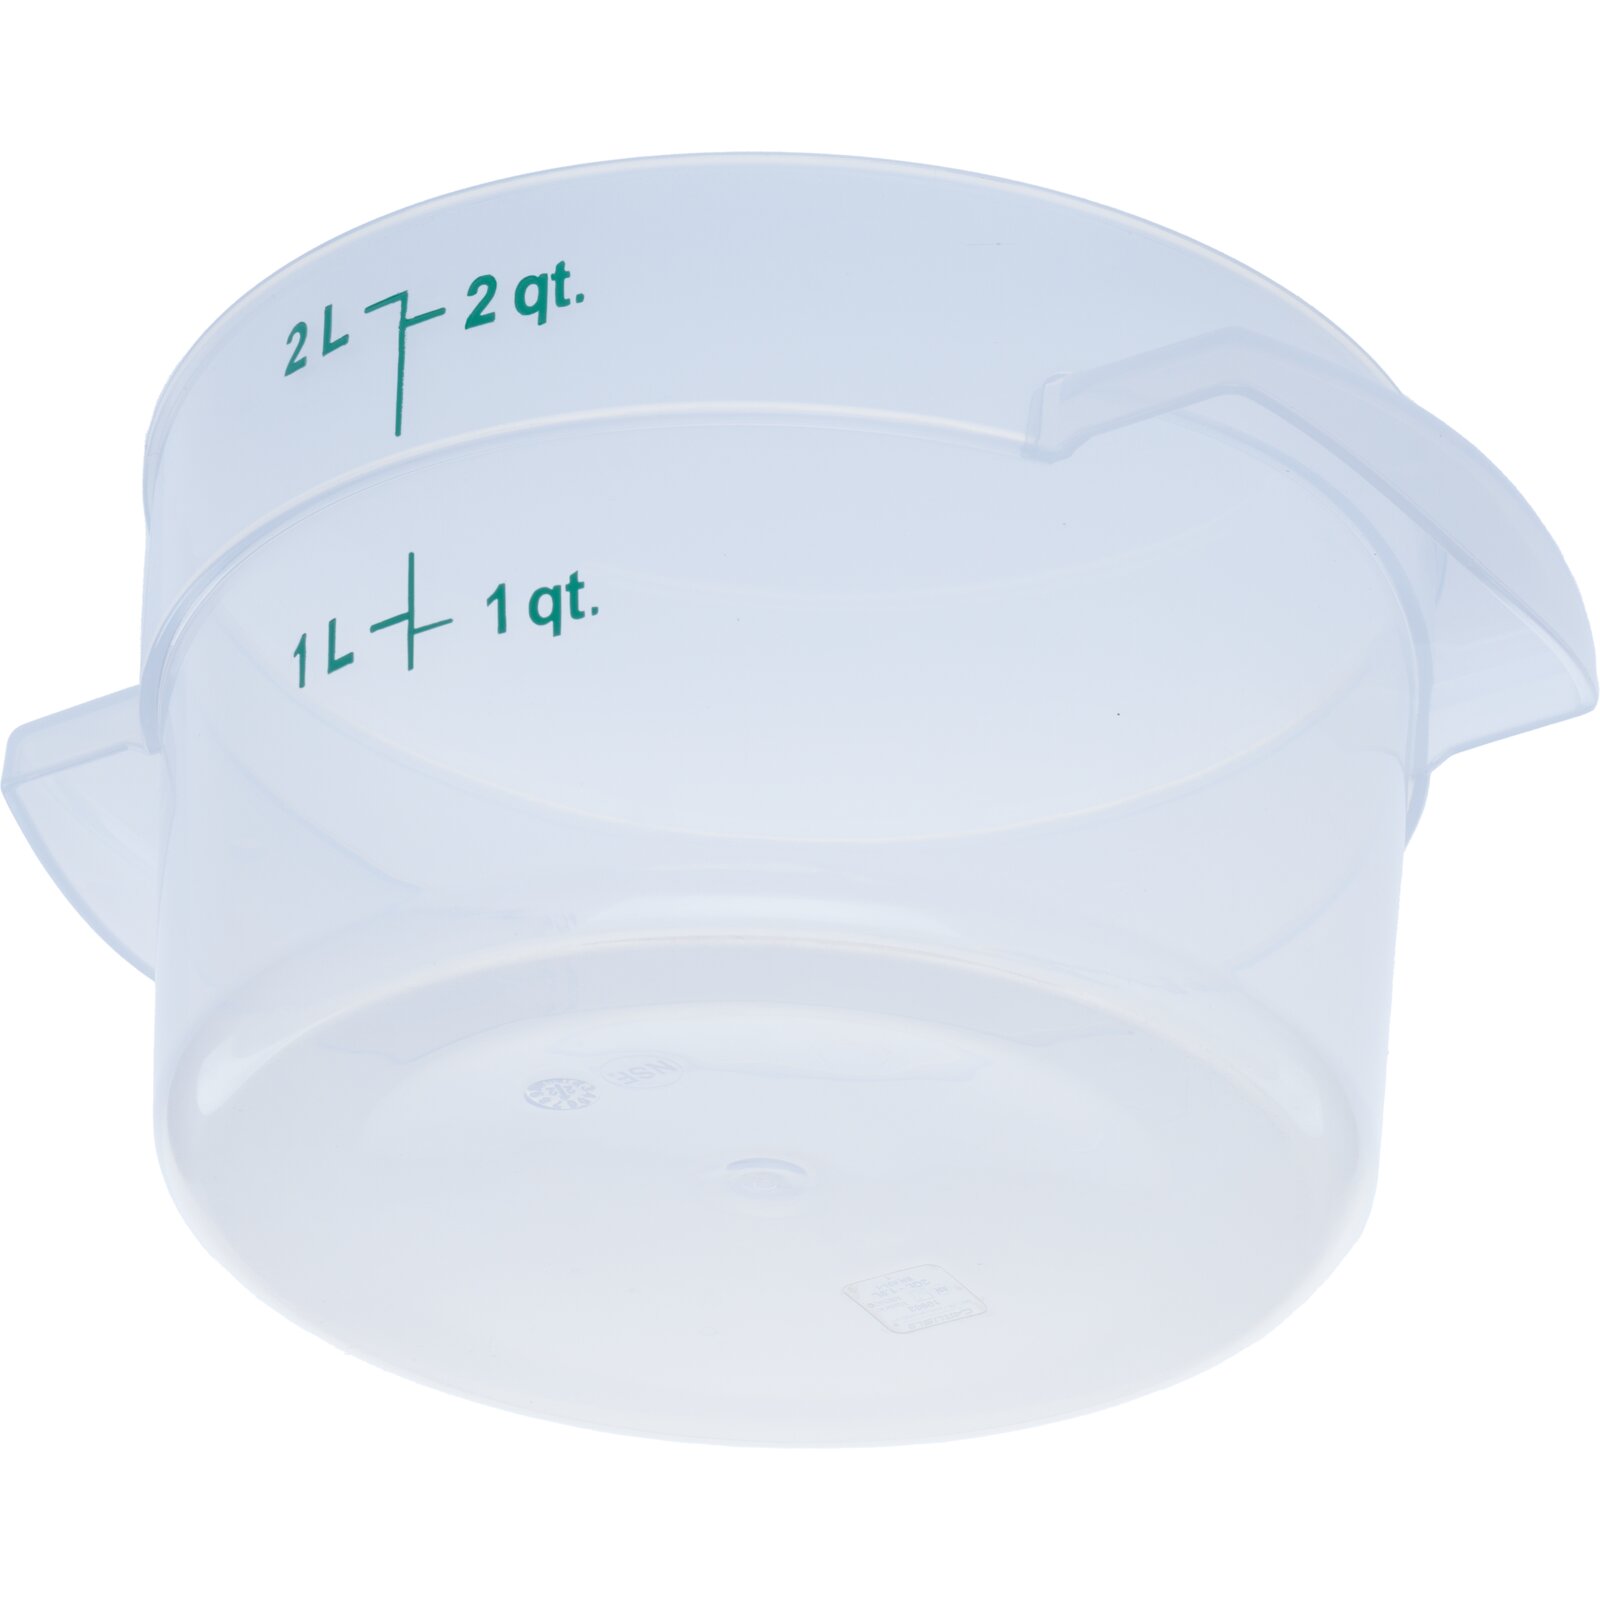 1076607 - StorPlus™ Round Food Storage Container 8 qt - Clear